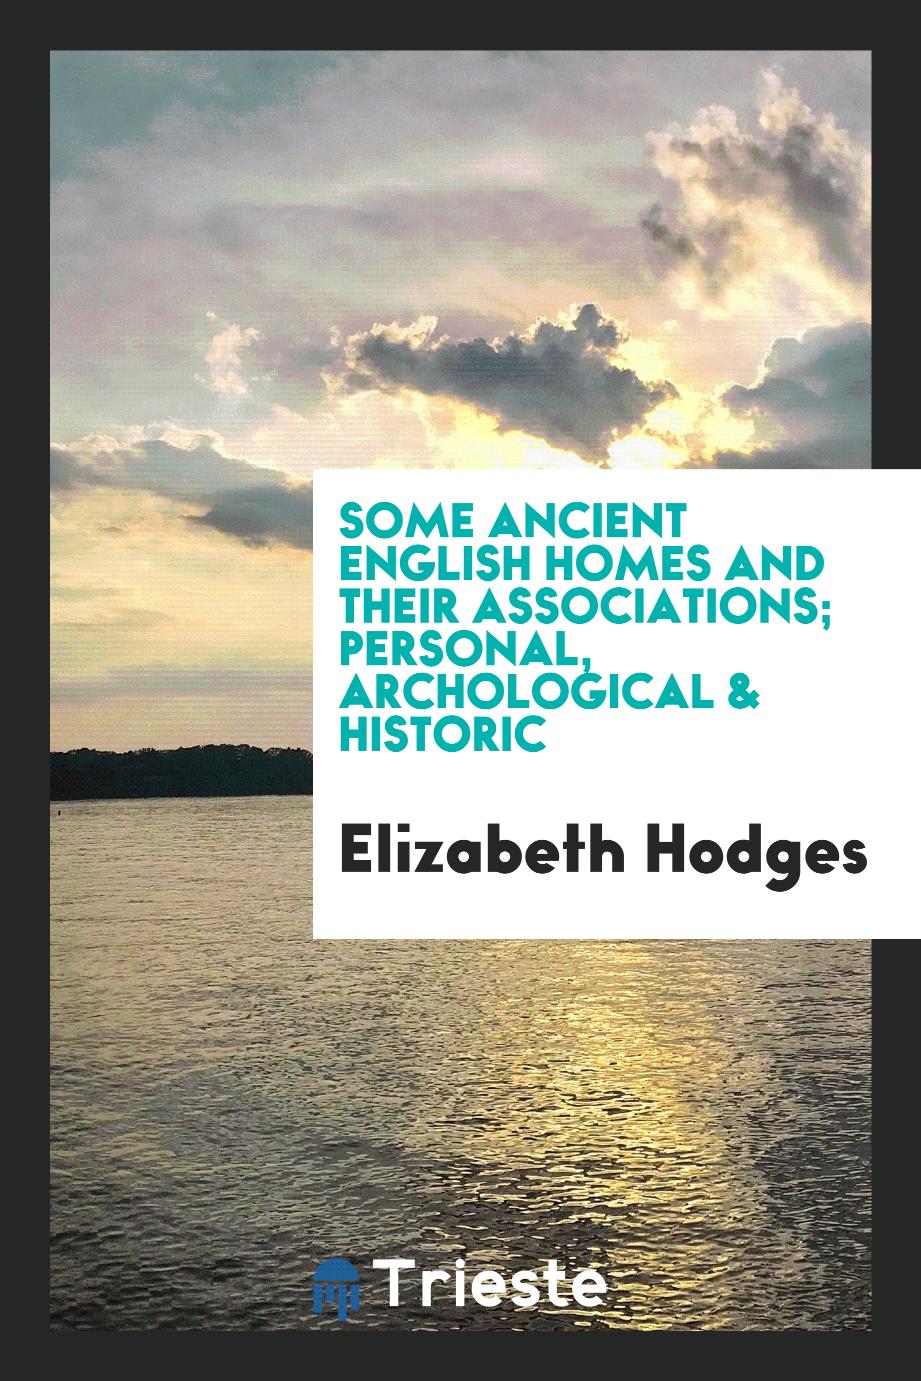 Some ancient English homes and their associations; personal, archological & historic